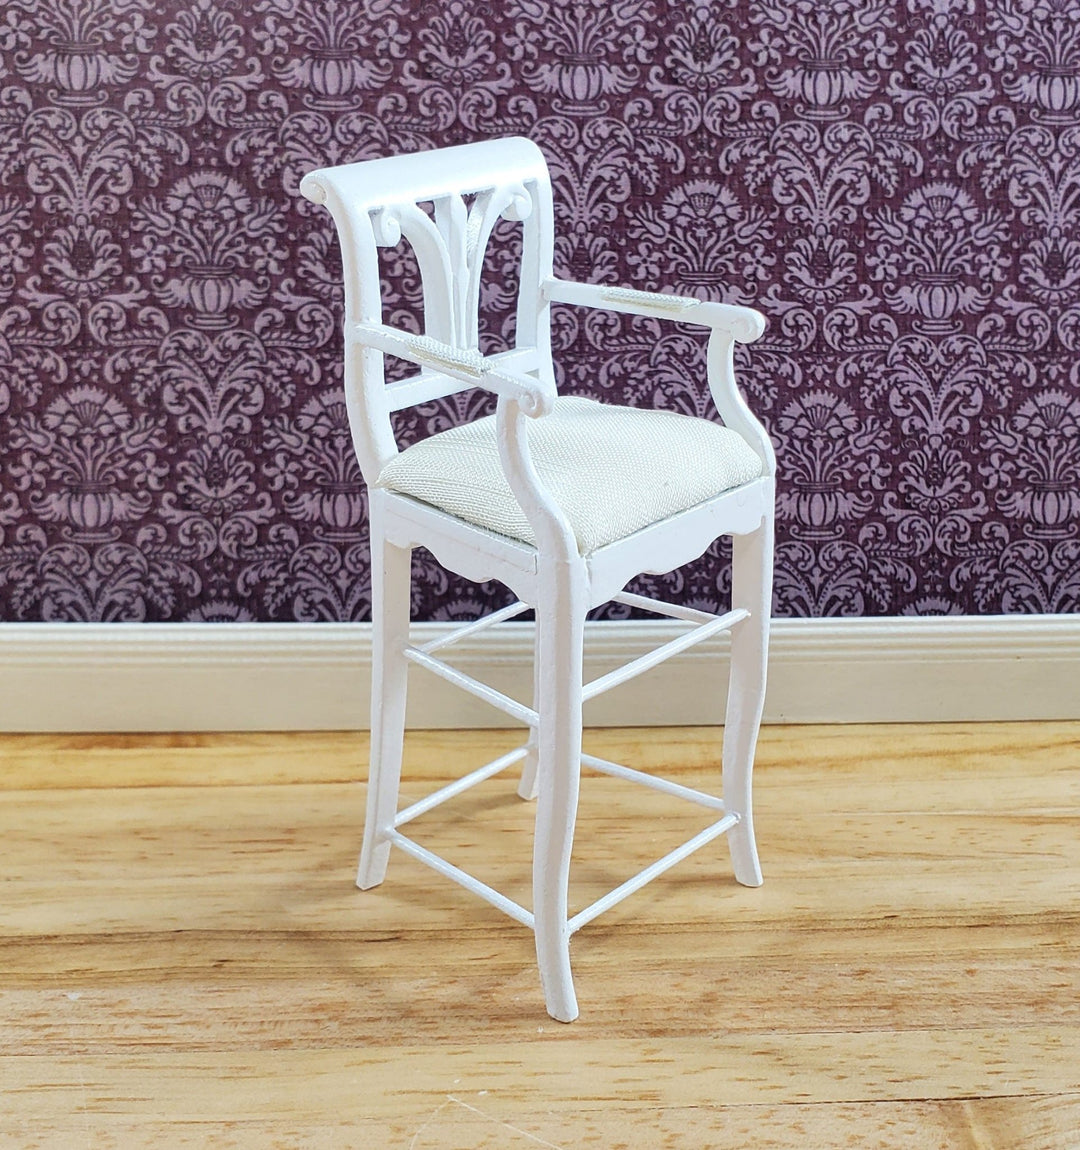 JBM Dollhouse Tall Bar Chair Stool with Padded Seat WHITE 1:12 Scale Furniture - Miniature Crush